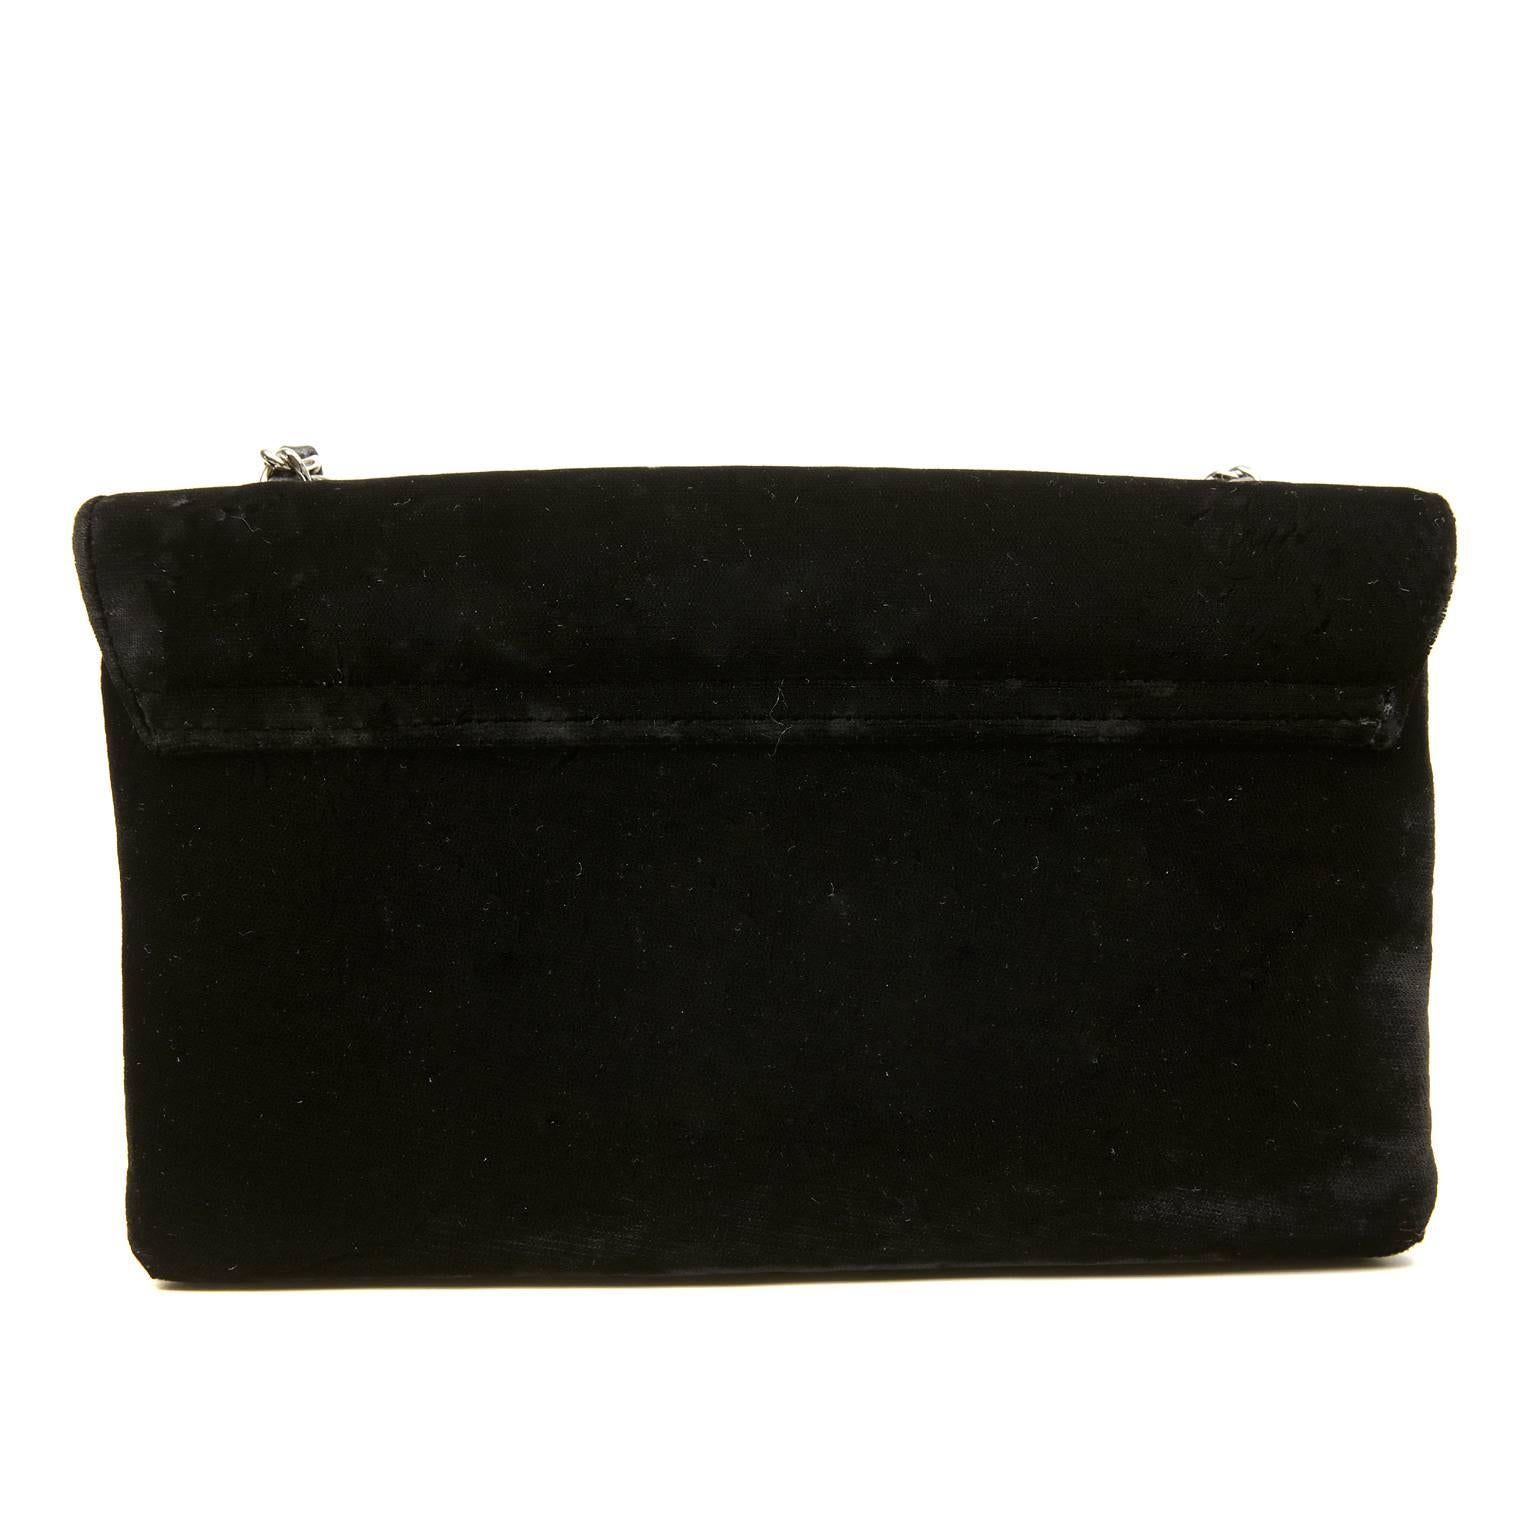 Chanel Black Velvet Precious Symbols Evening Bag- PRISTINE
 A roomy width and a double pouch design make this piece a perfect size; it fits more than just a lipstick.  

Soft black velvet simple flap bag is accented with black leather iconic